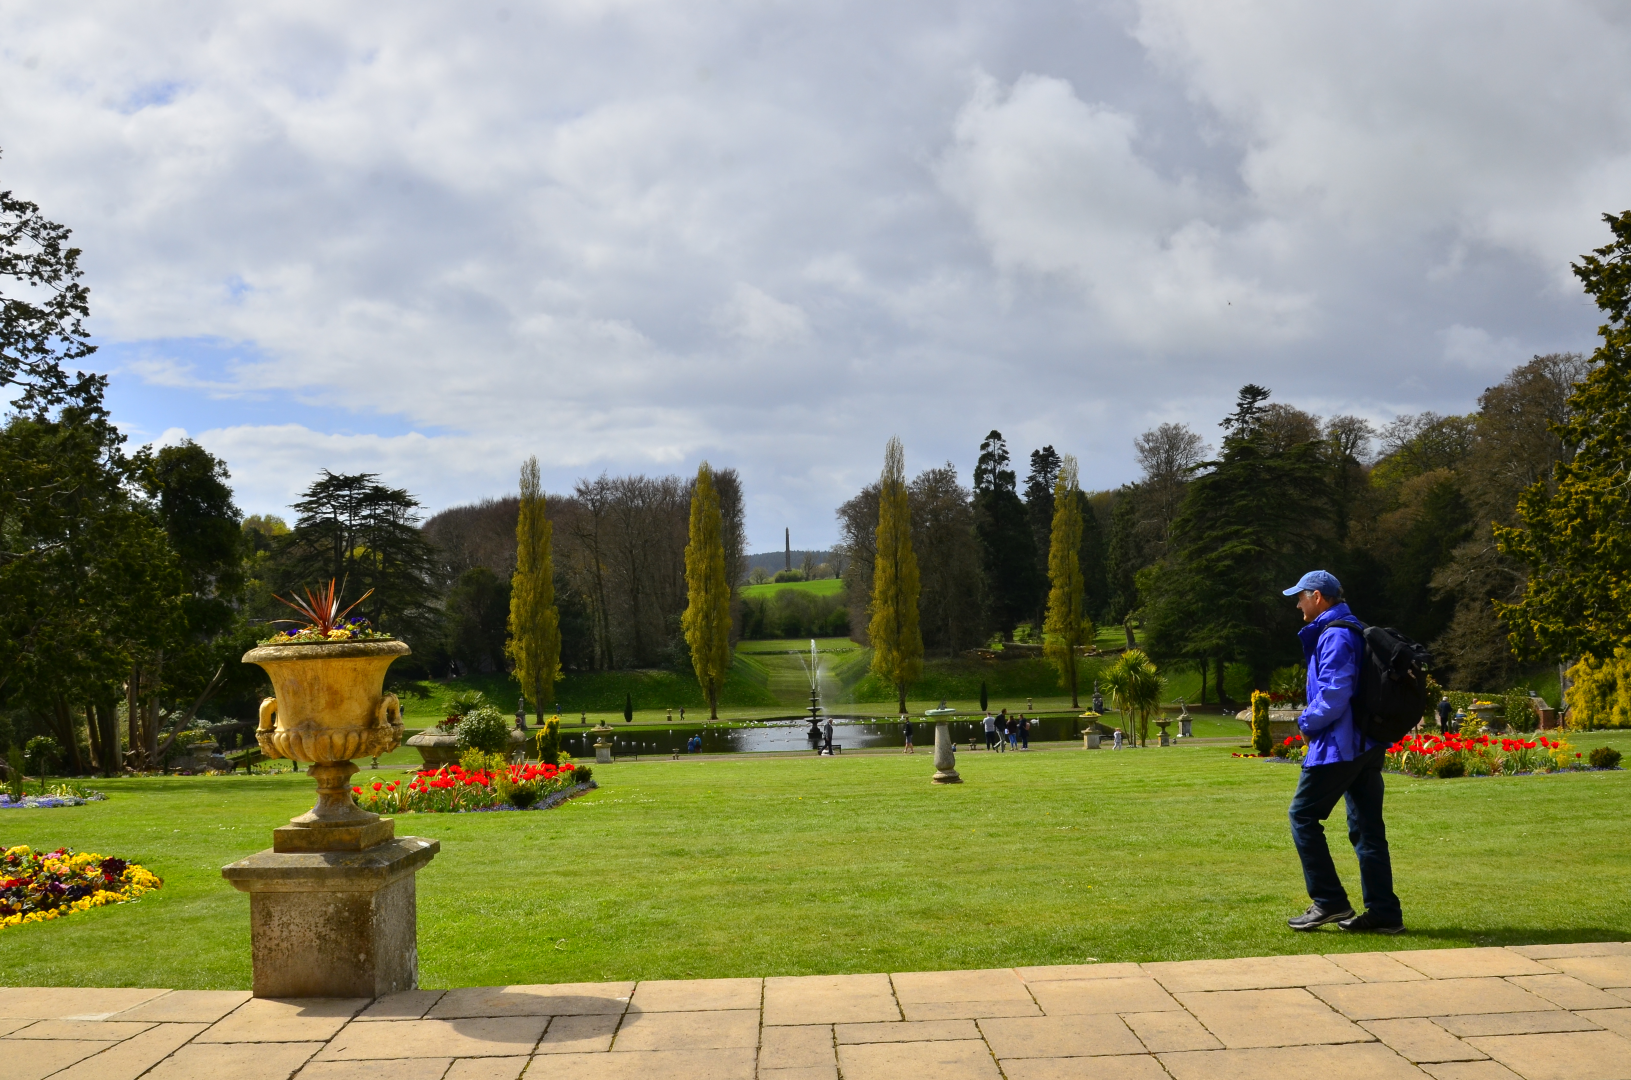 The view looking at the gardens in Bicton Park